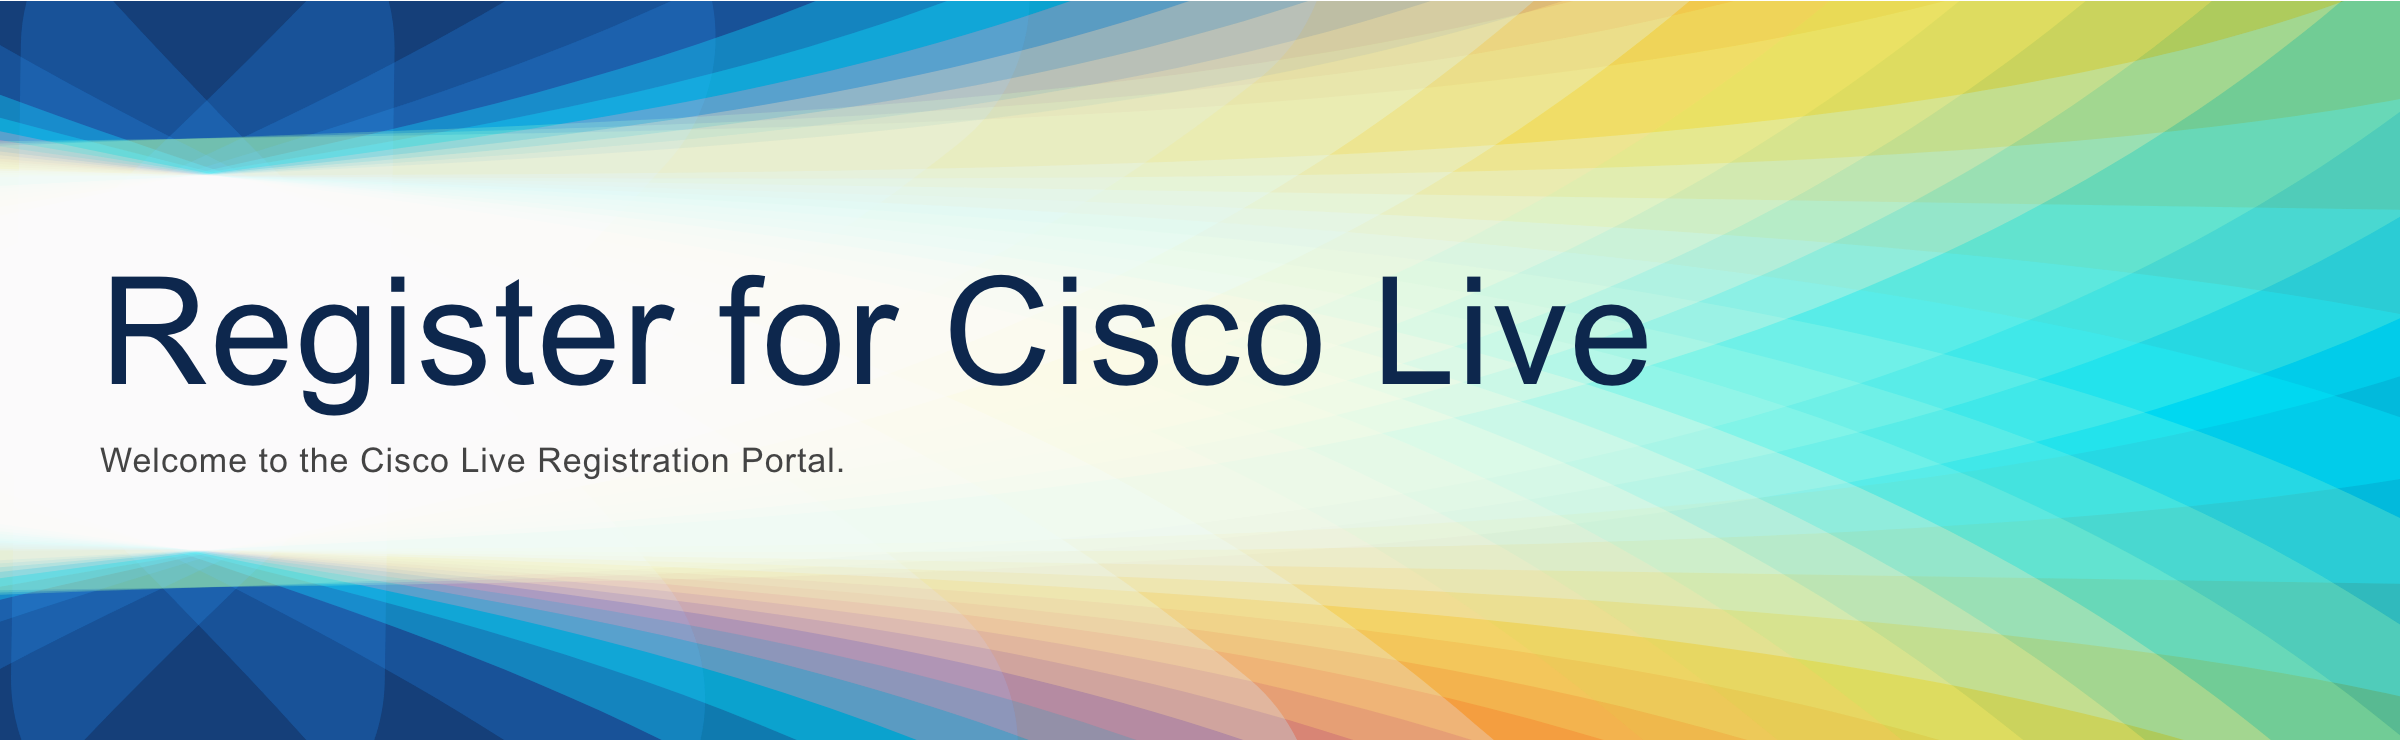 The Cisco Live Cheat Sheet 5 MustKnow Tips Techimike